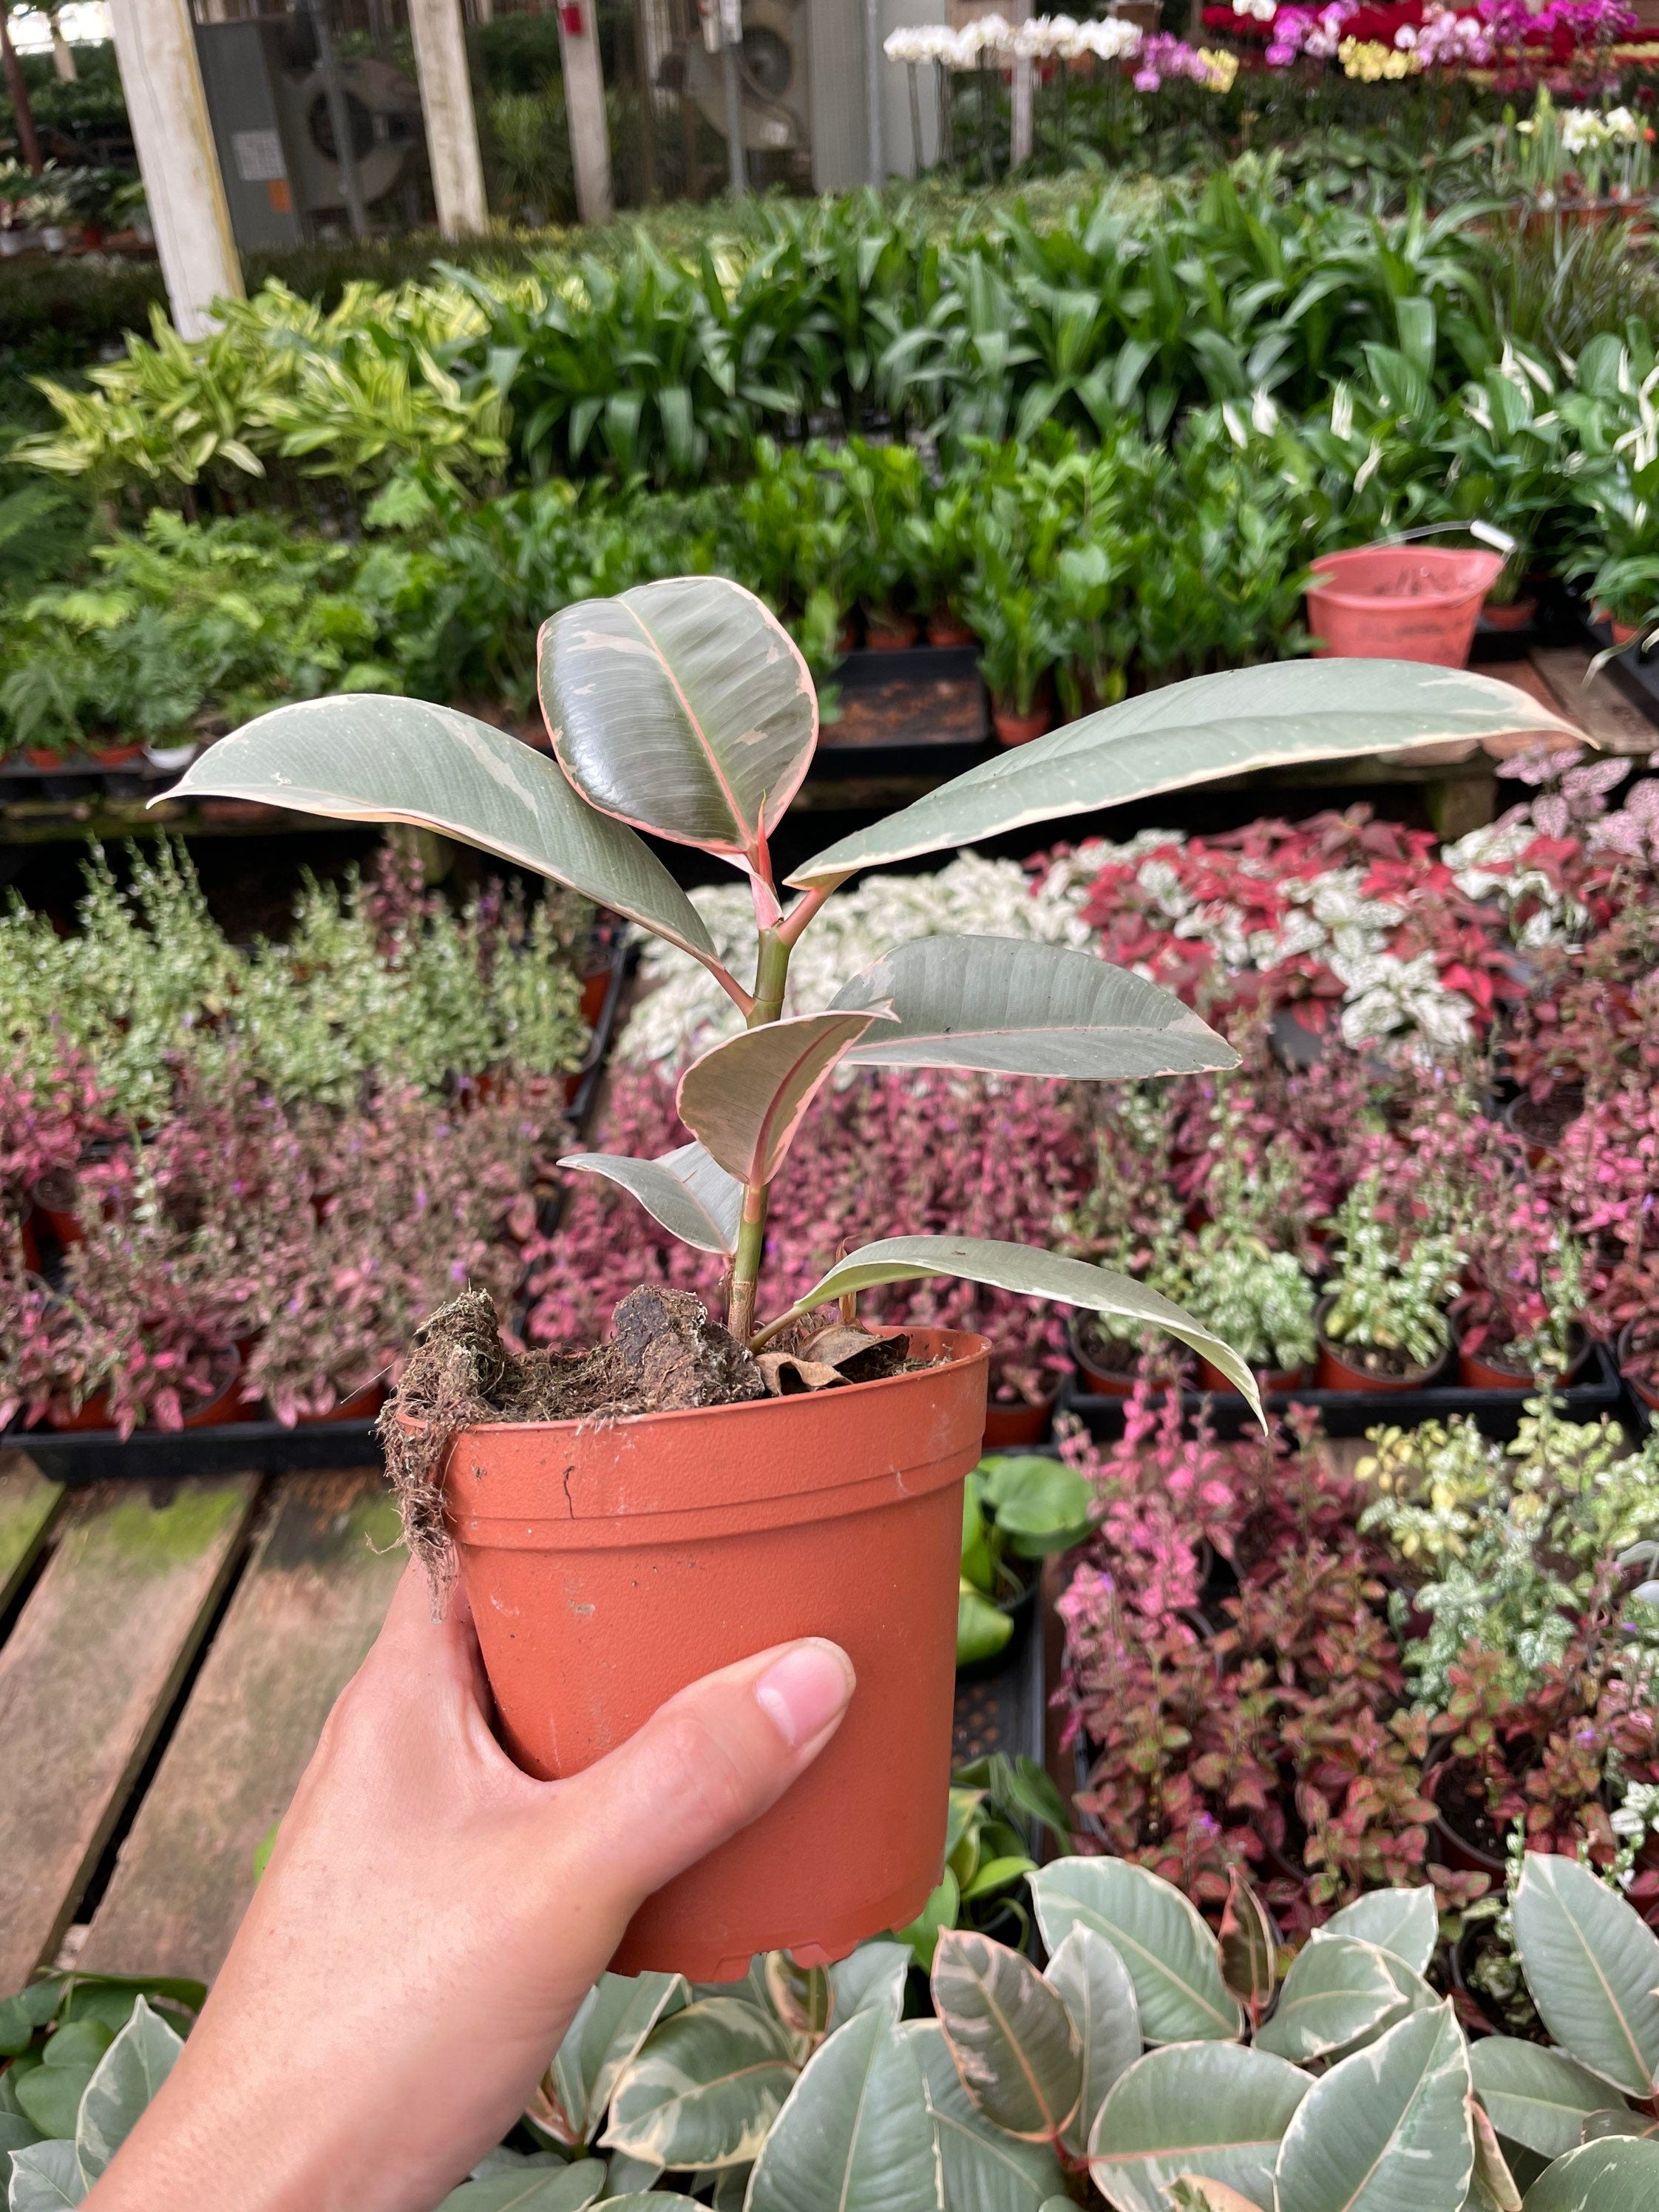 Small starter variegated ficus elastica teneke -similar to picture not exact plant